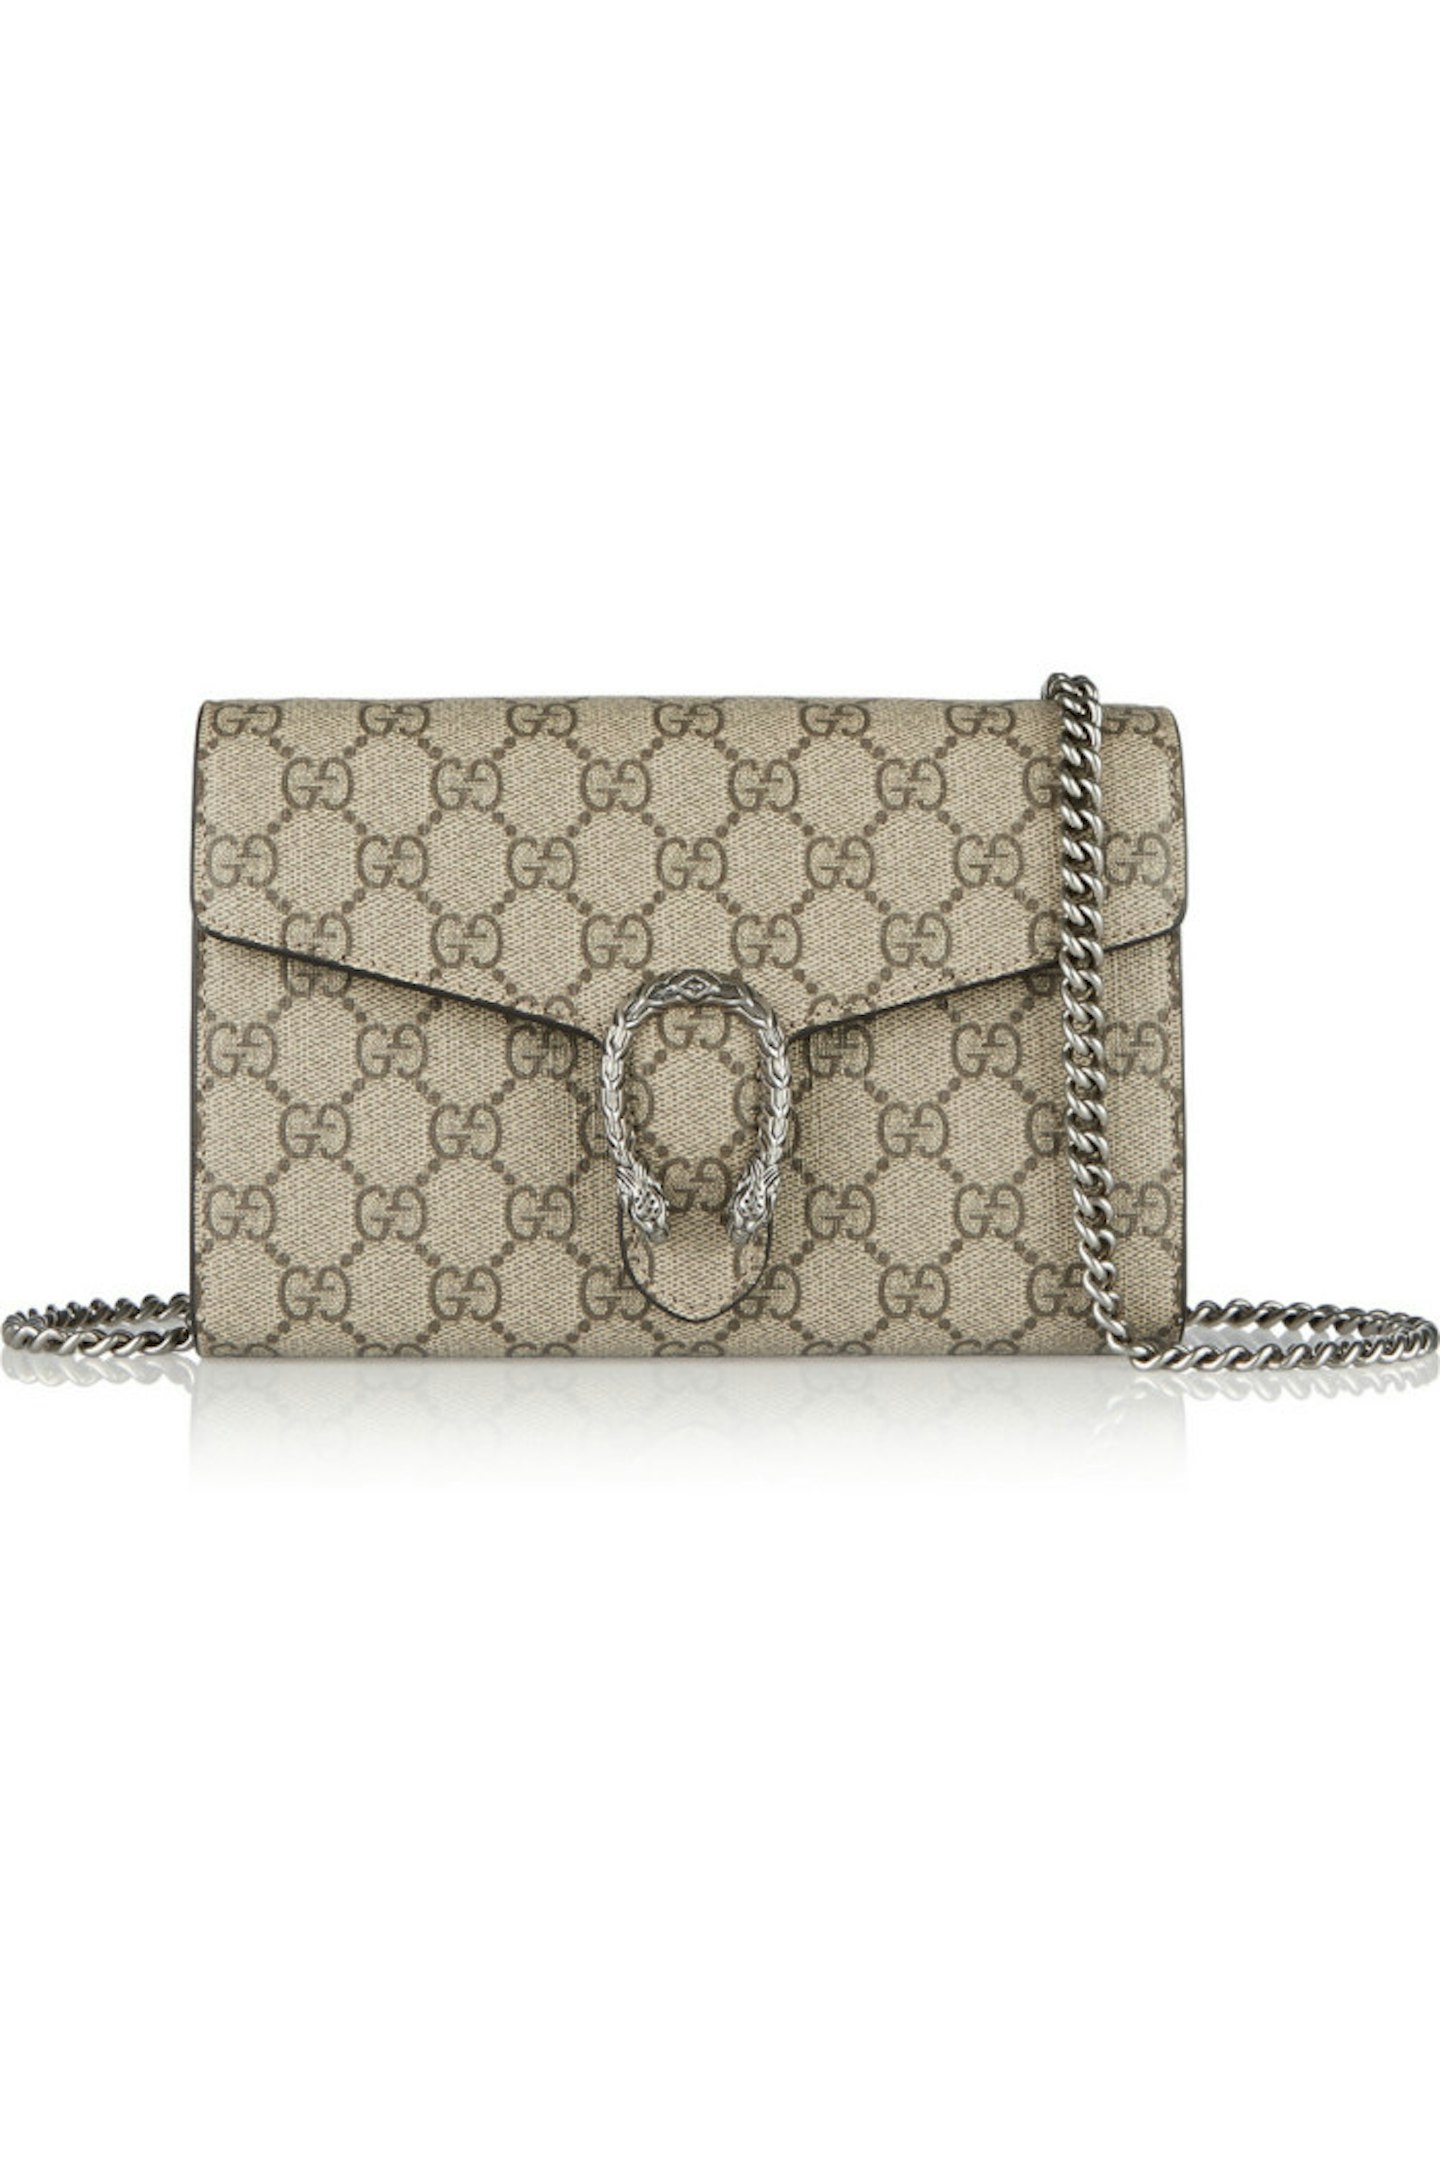 Gucci Dionysus Canvas and Leather Shoulder Bag, £695.00